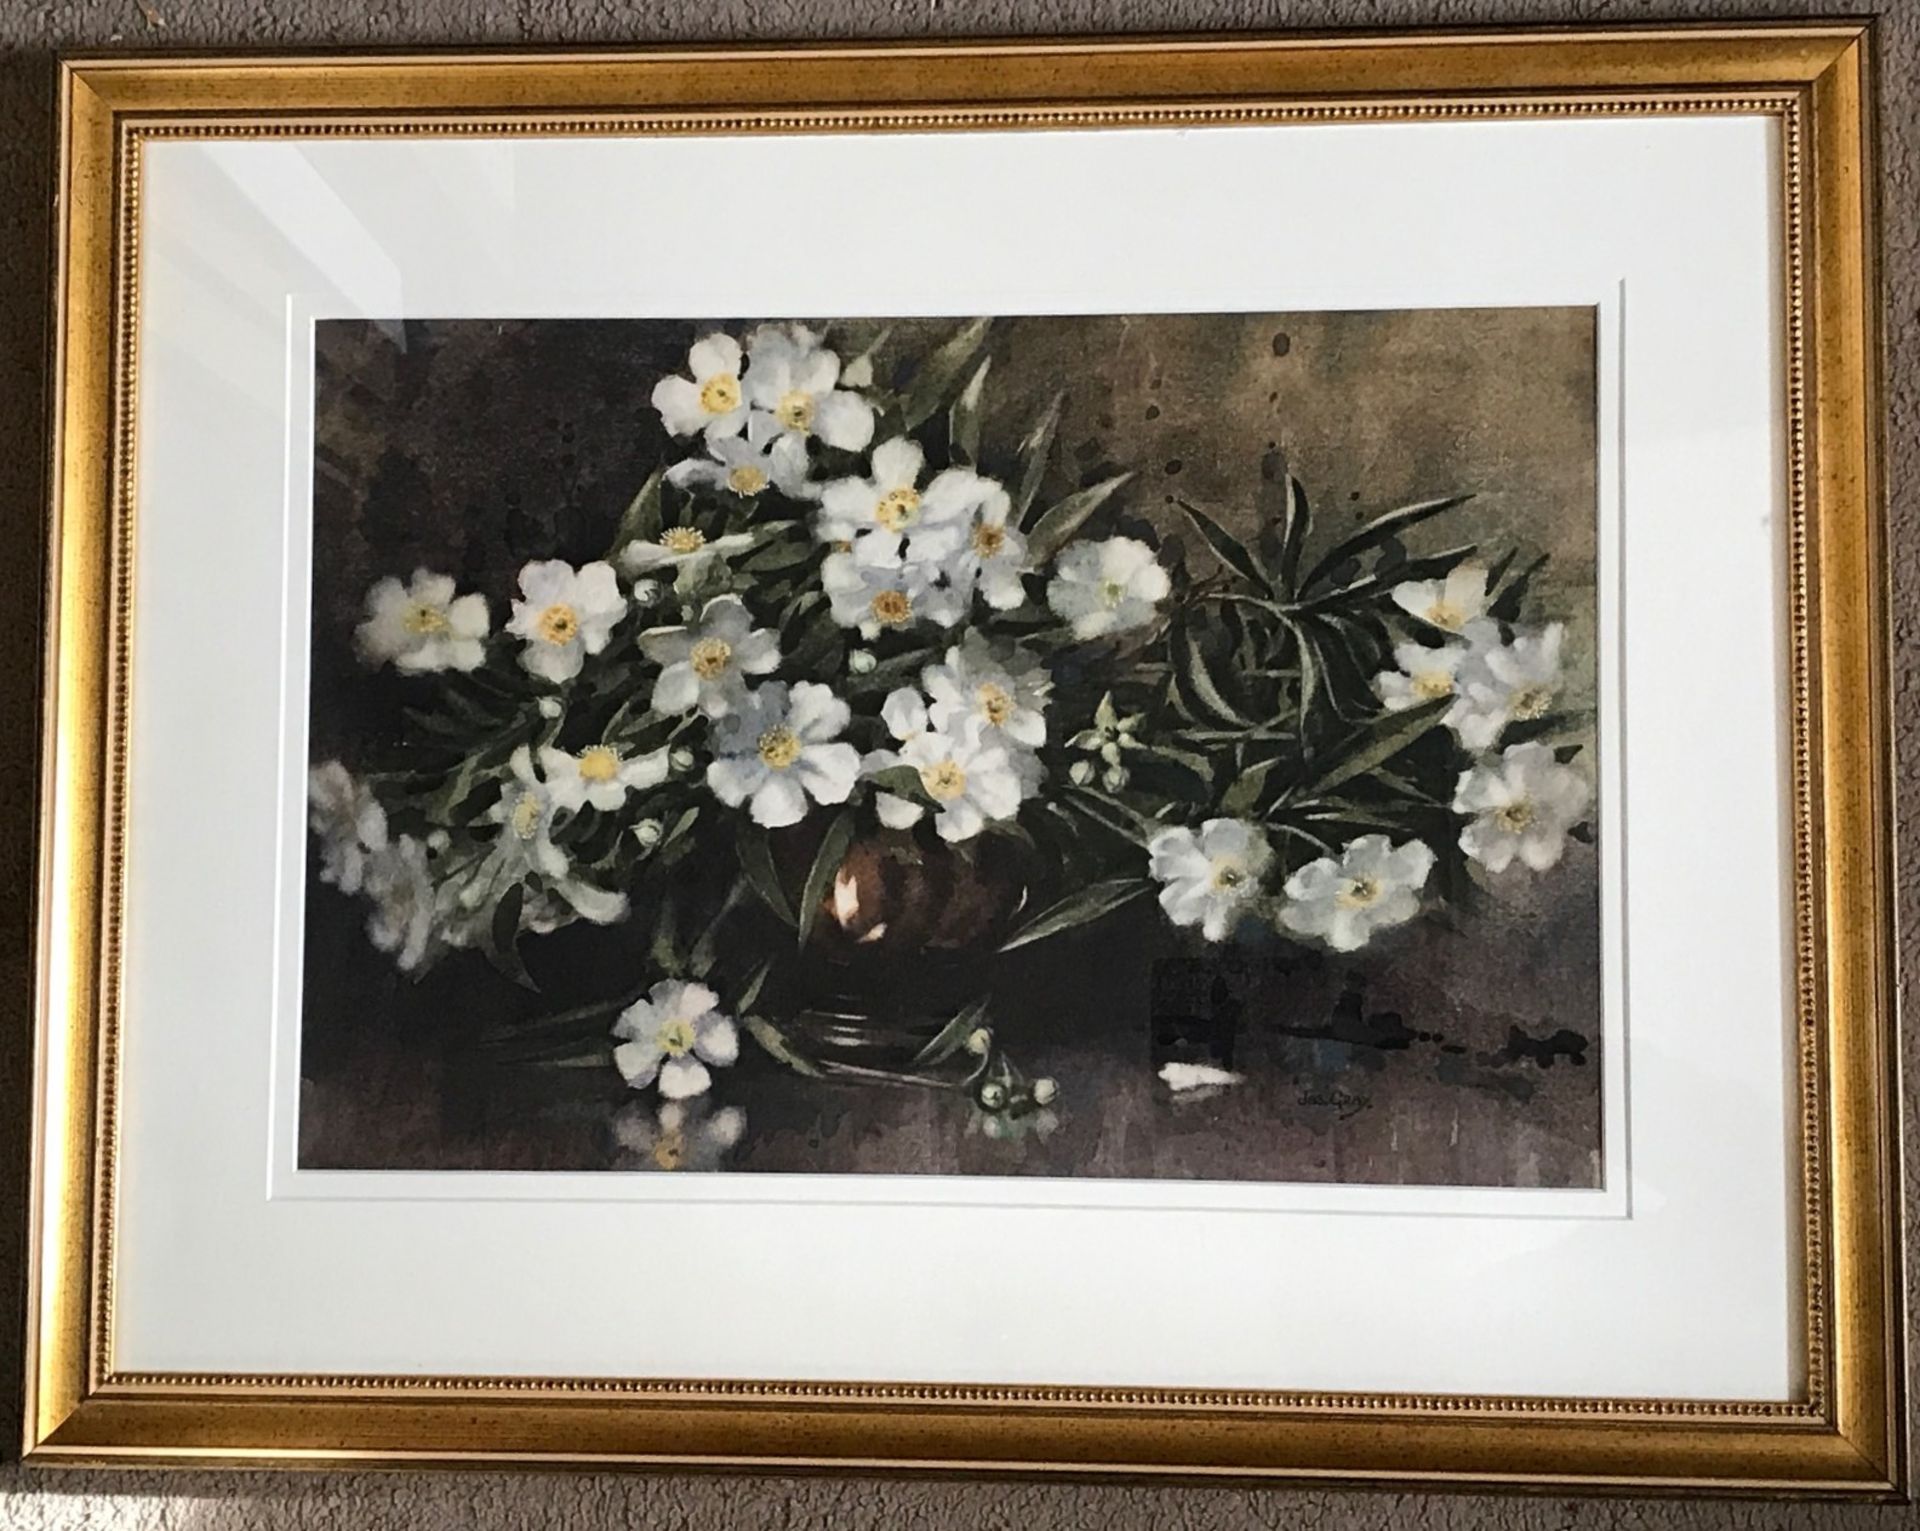 Christmas roses Original signed watercolour by Scottish artist James Grey RSW , ex G.I, R.S.A, R.A - Image 2 of 4